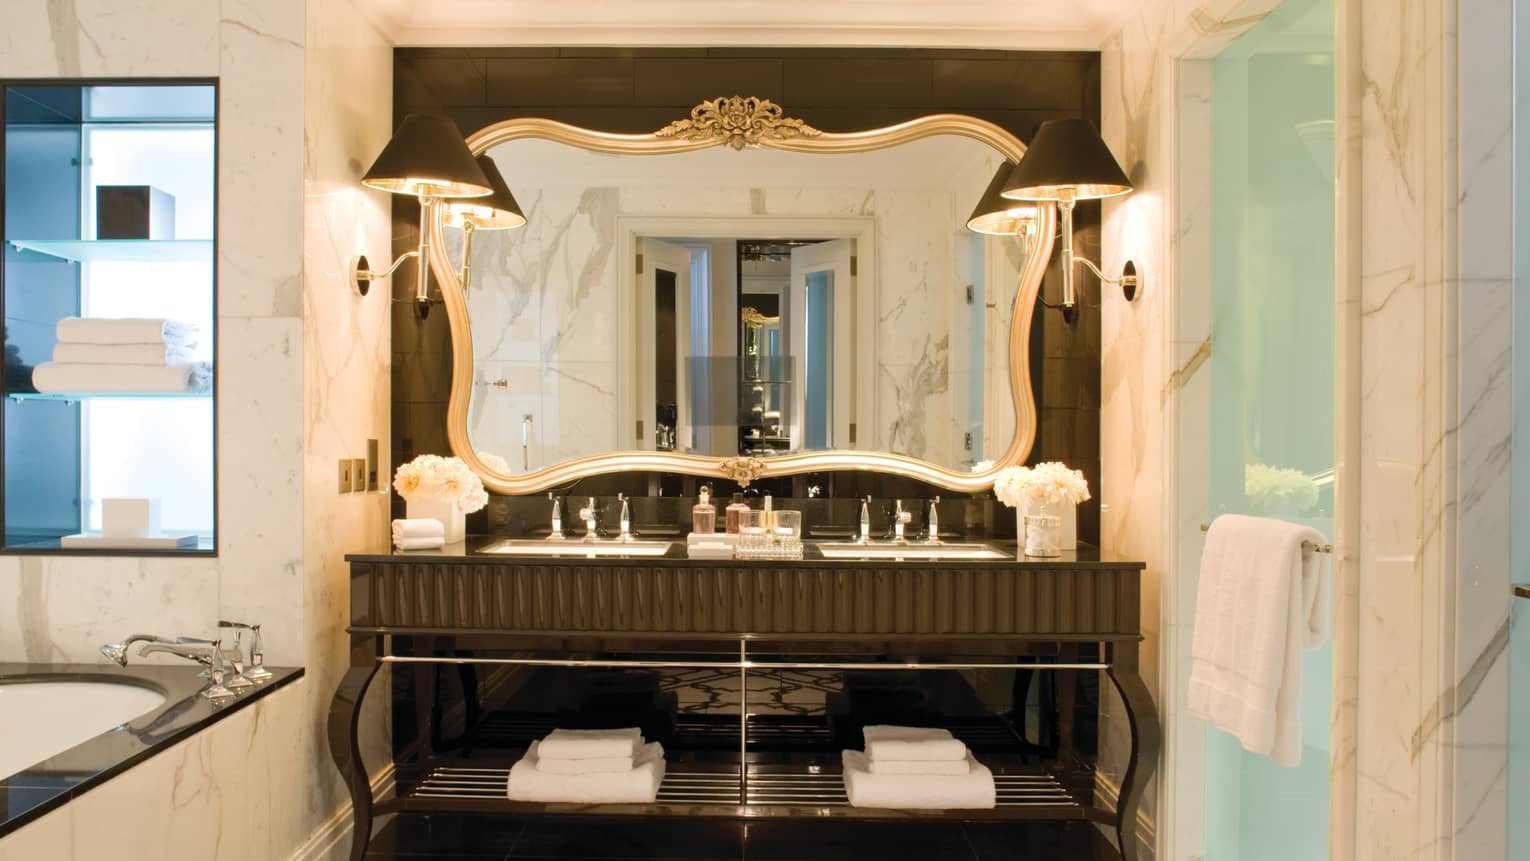 Large hotel bathroom vanity with double sink, tall mirror with gold frame, corner of marble bath visible